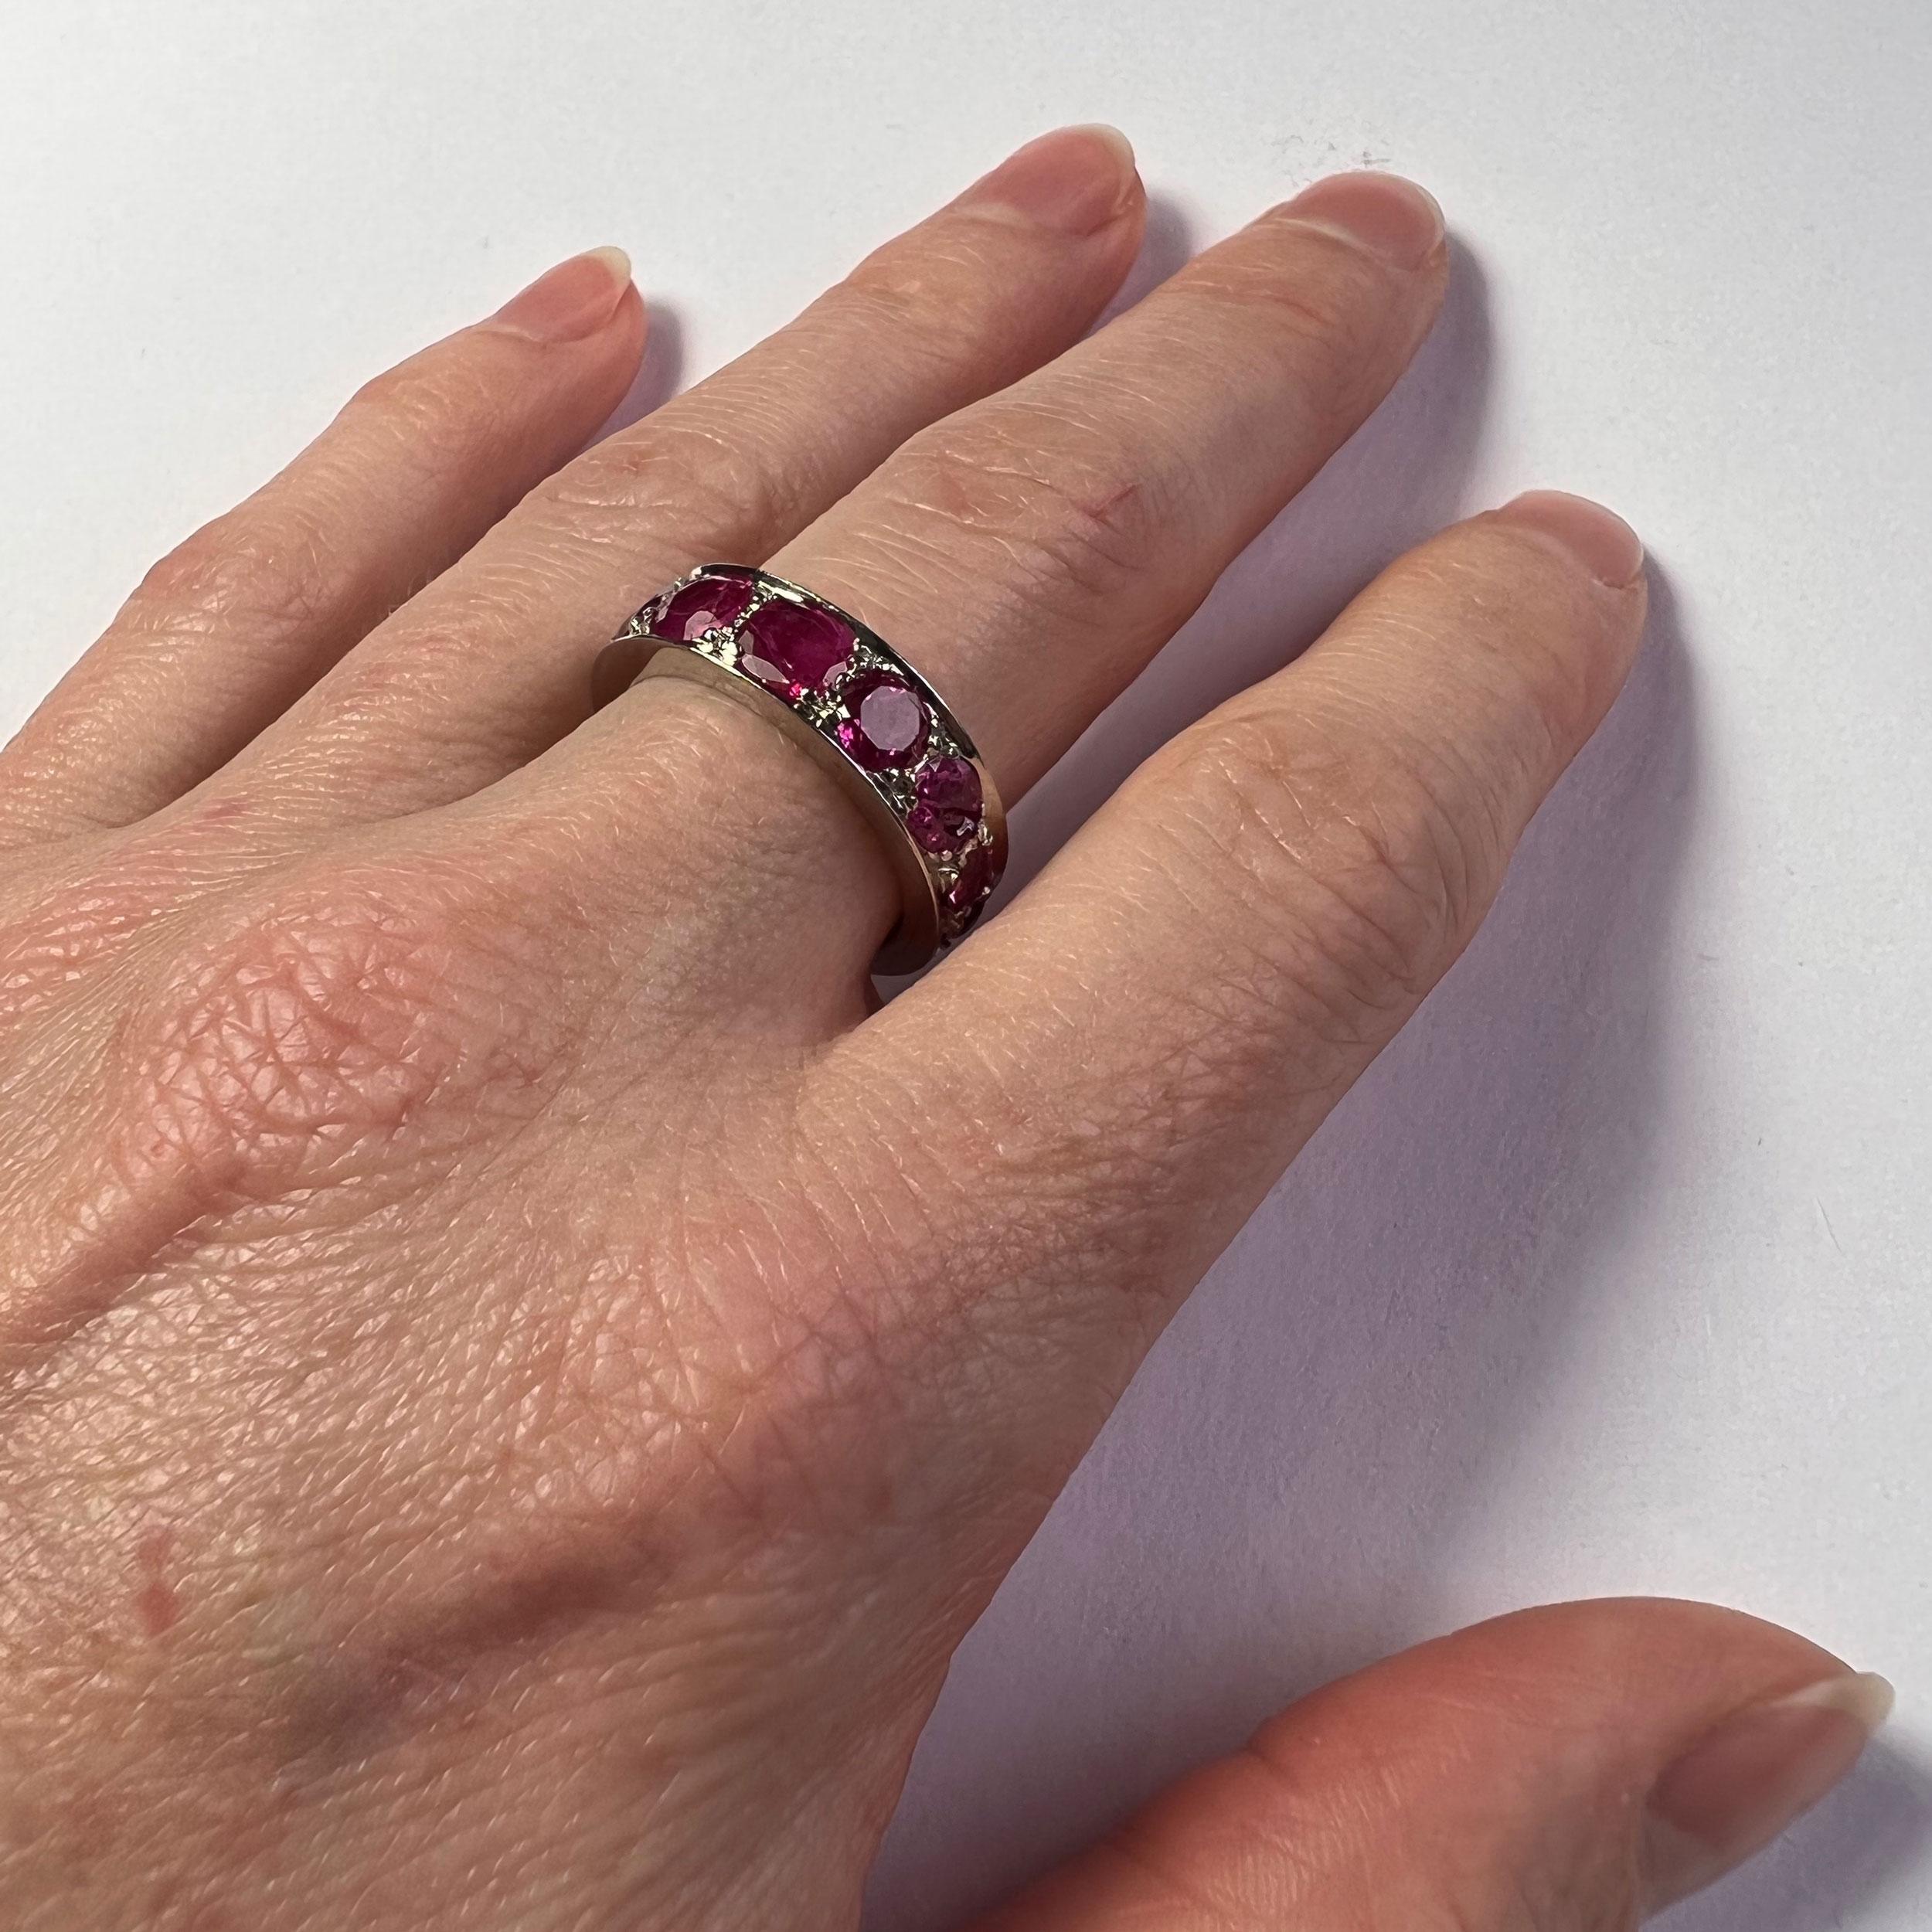 An 18 karat white gold ring set with ten cushion cut natural untreated rubies weighing an approximate total of 4.10 carats.

Ring size 6.75 (US), N (UK).

